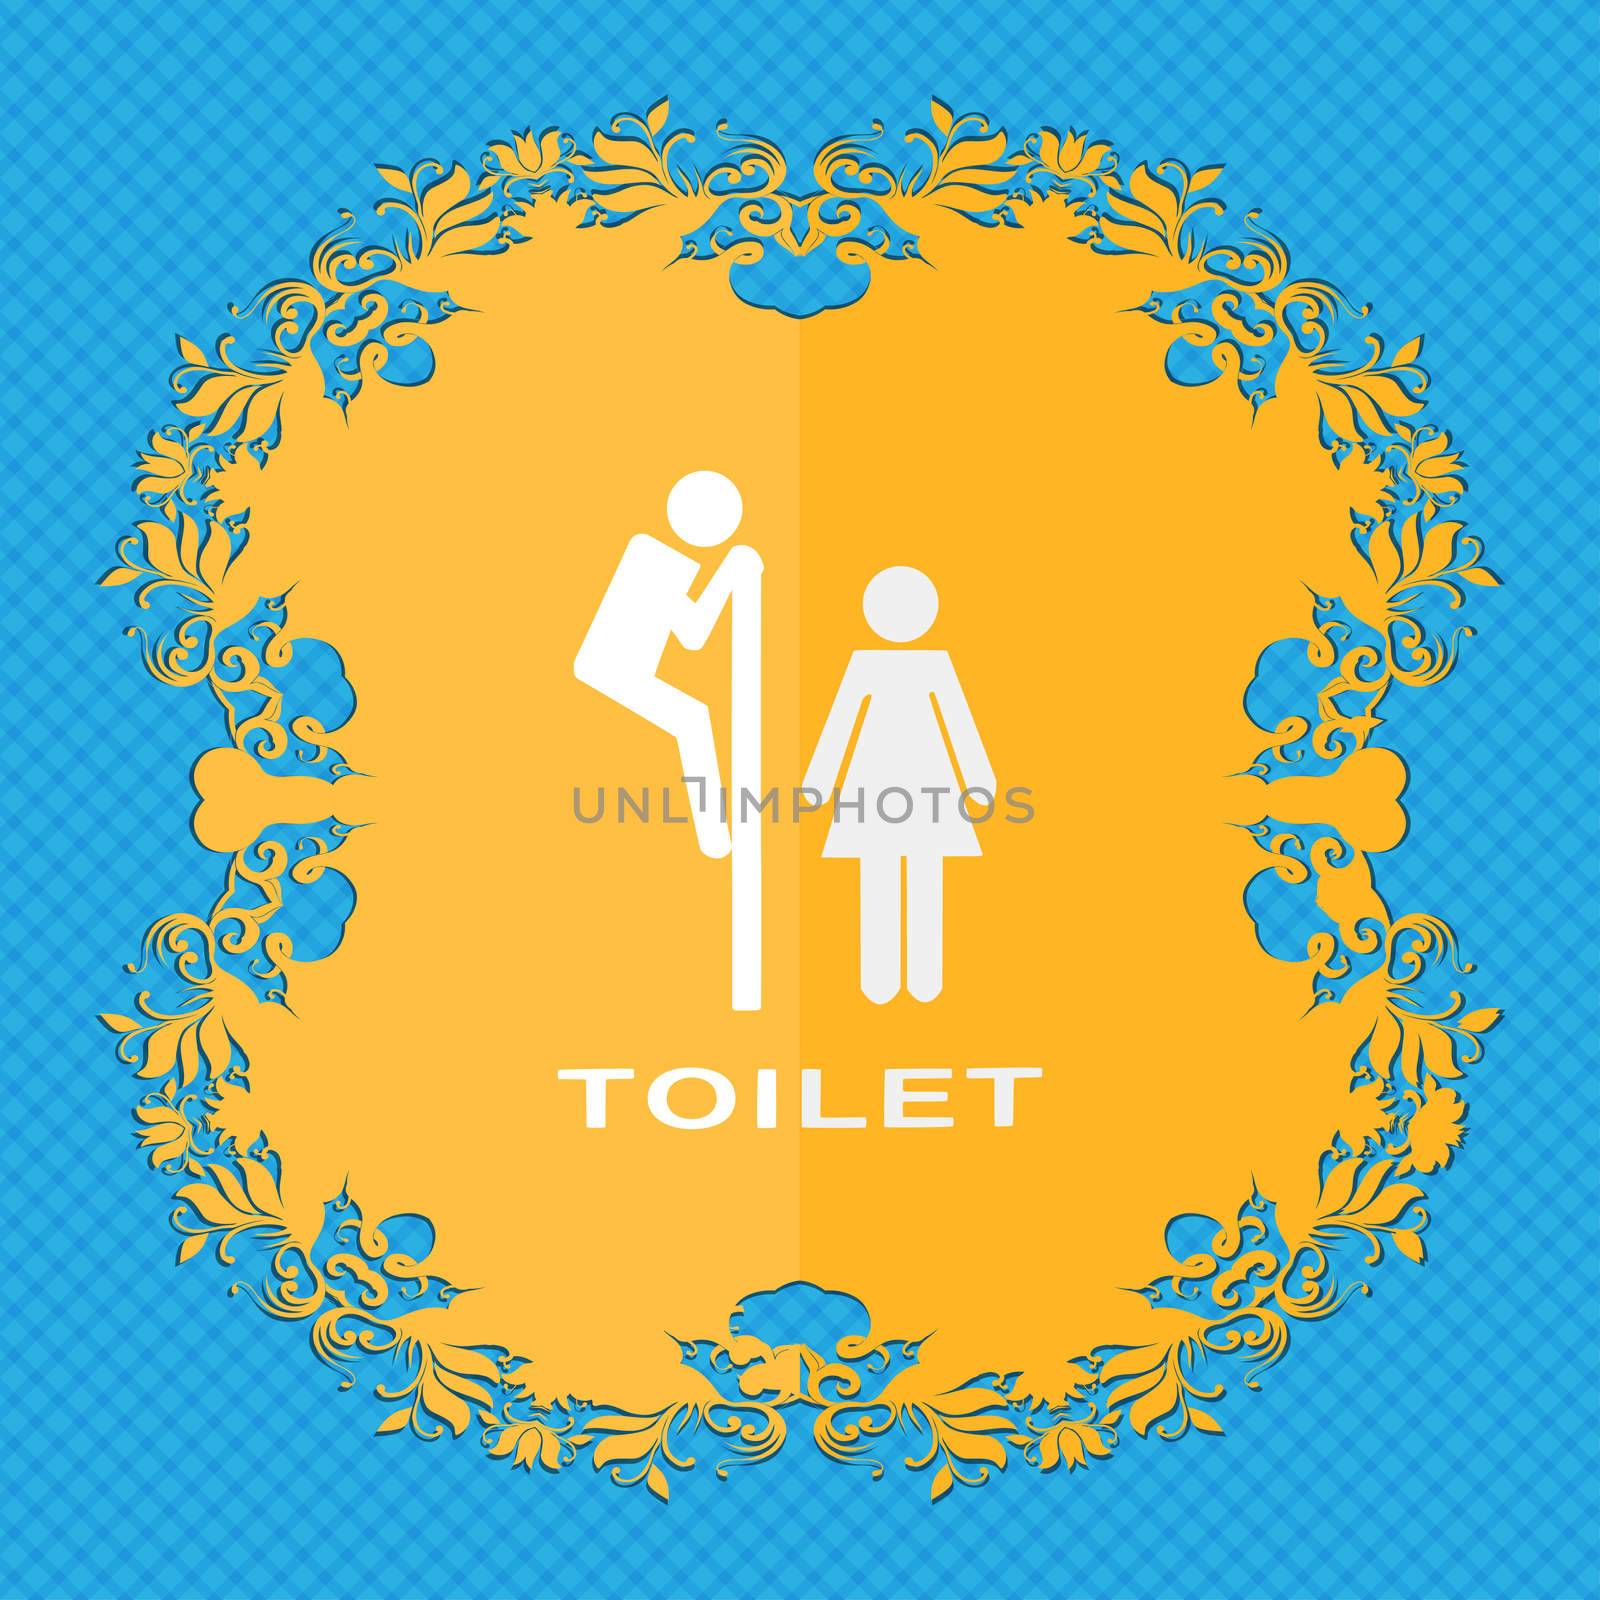 toilet. Floral flat design on a blue abstract background with place for your text. illustration